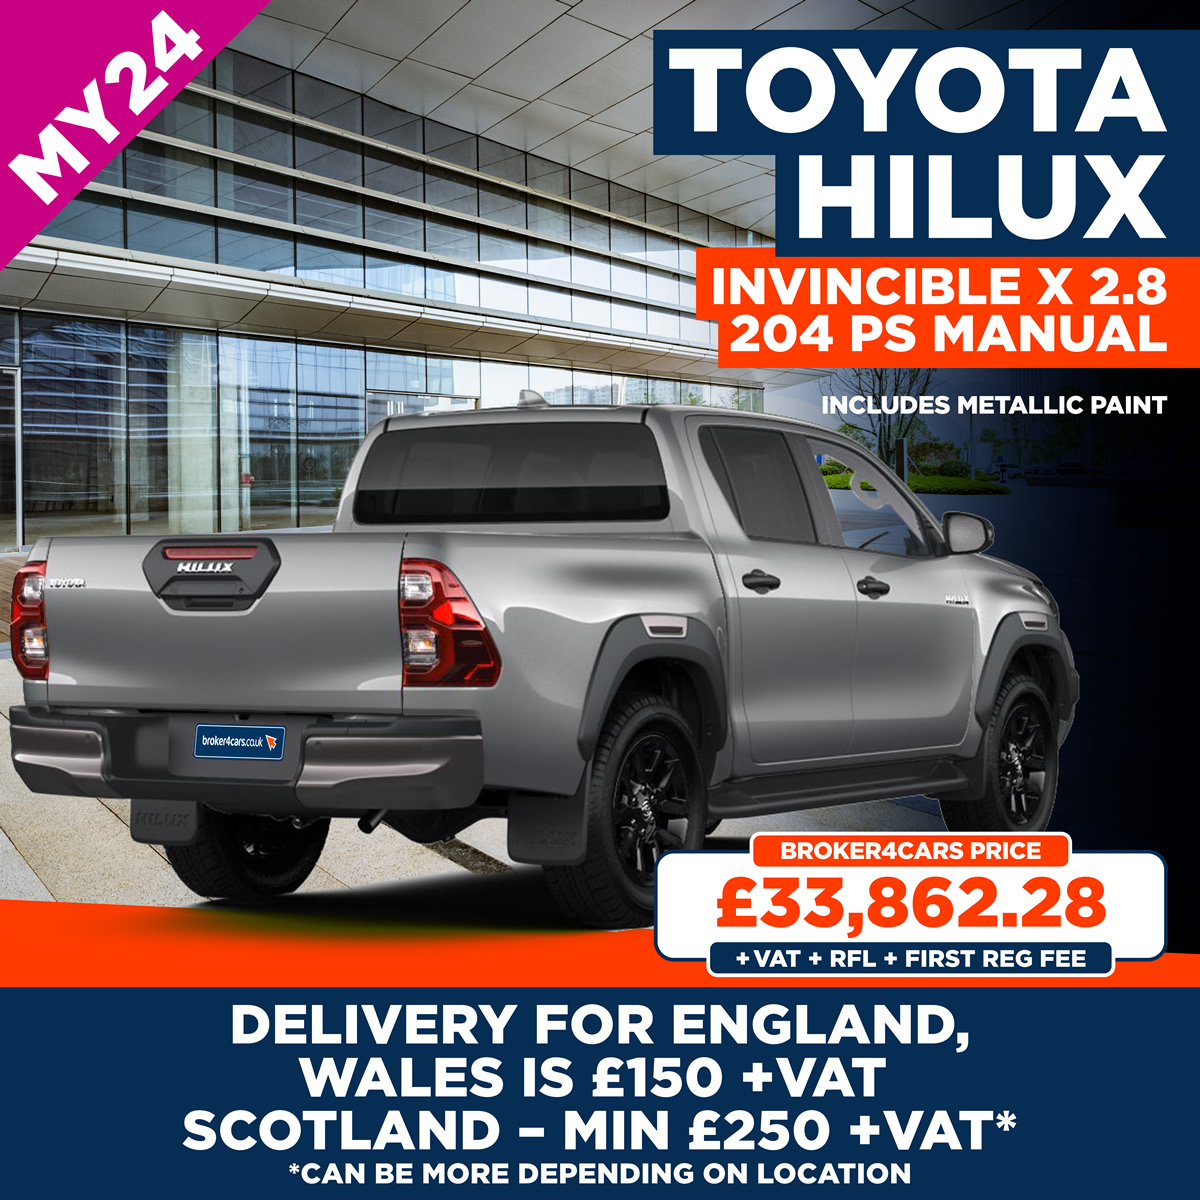 New MY24 Toyota Hilux Invincible X 2.8 204 PS Manual includes metallic paint. Delivery for England and Wales is £150- plus VAT. Scotland – Min £250 plus VAT, but can be more depending on location. £33,862.28 +VAT + RFL £335+ First Reg Fee £55